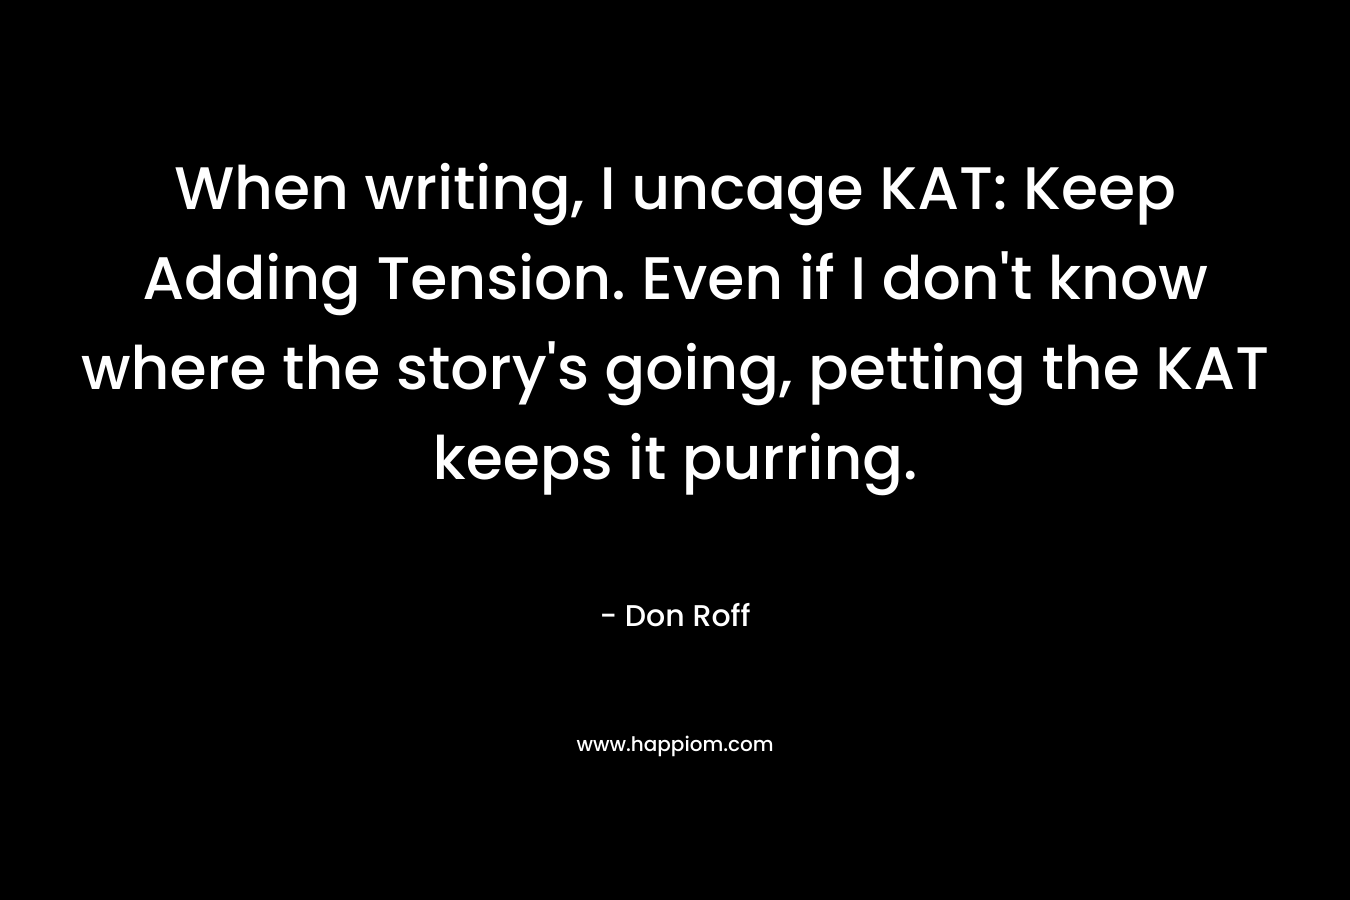 When writing, I uncage KAT: Keep Adding Tension. Even if I don’t know where the story’s going, petting the KAT keeps it purring. – Don Roff